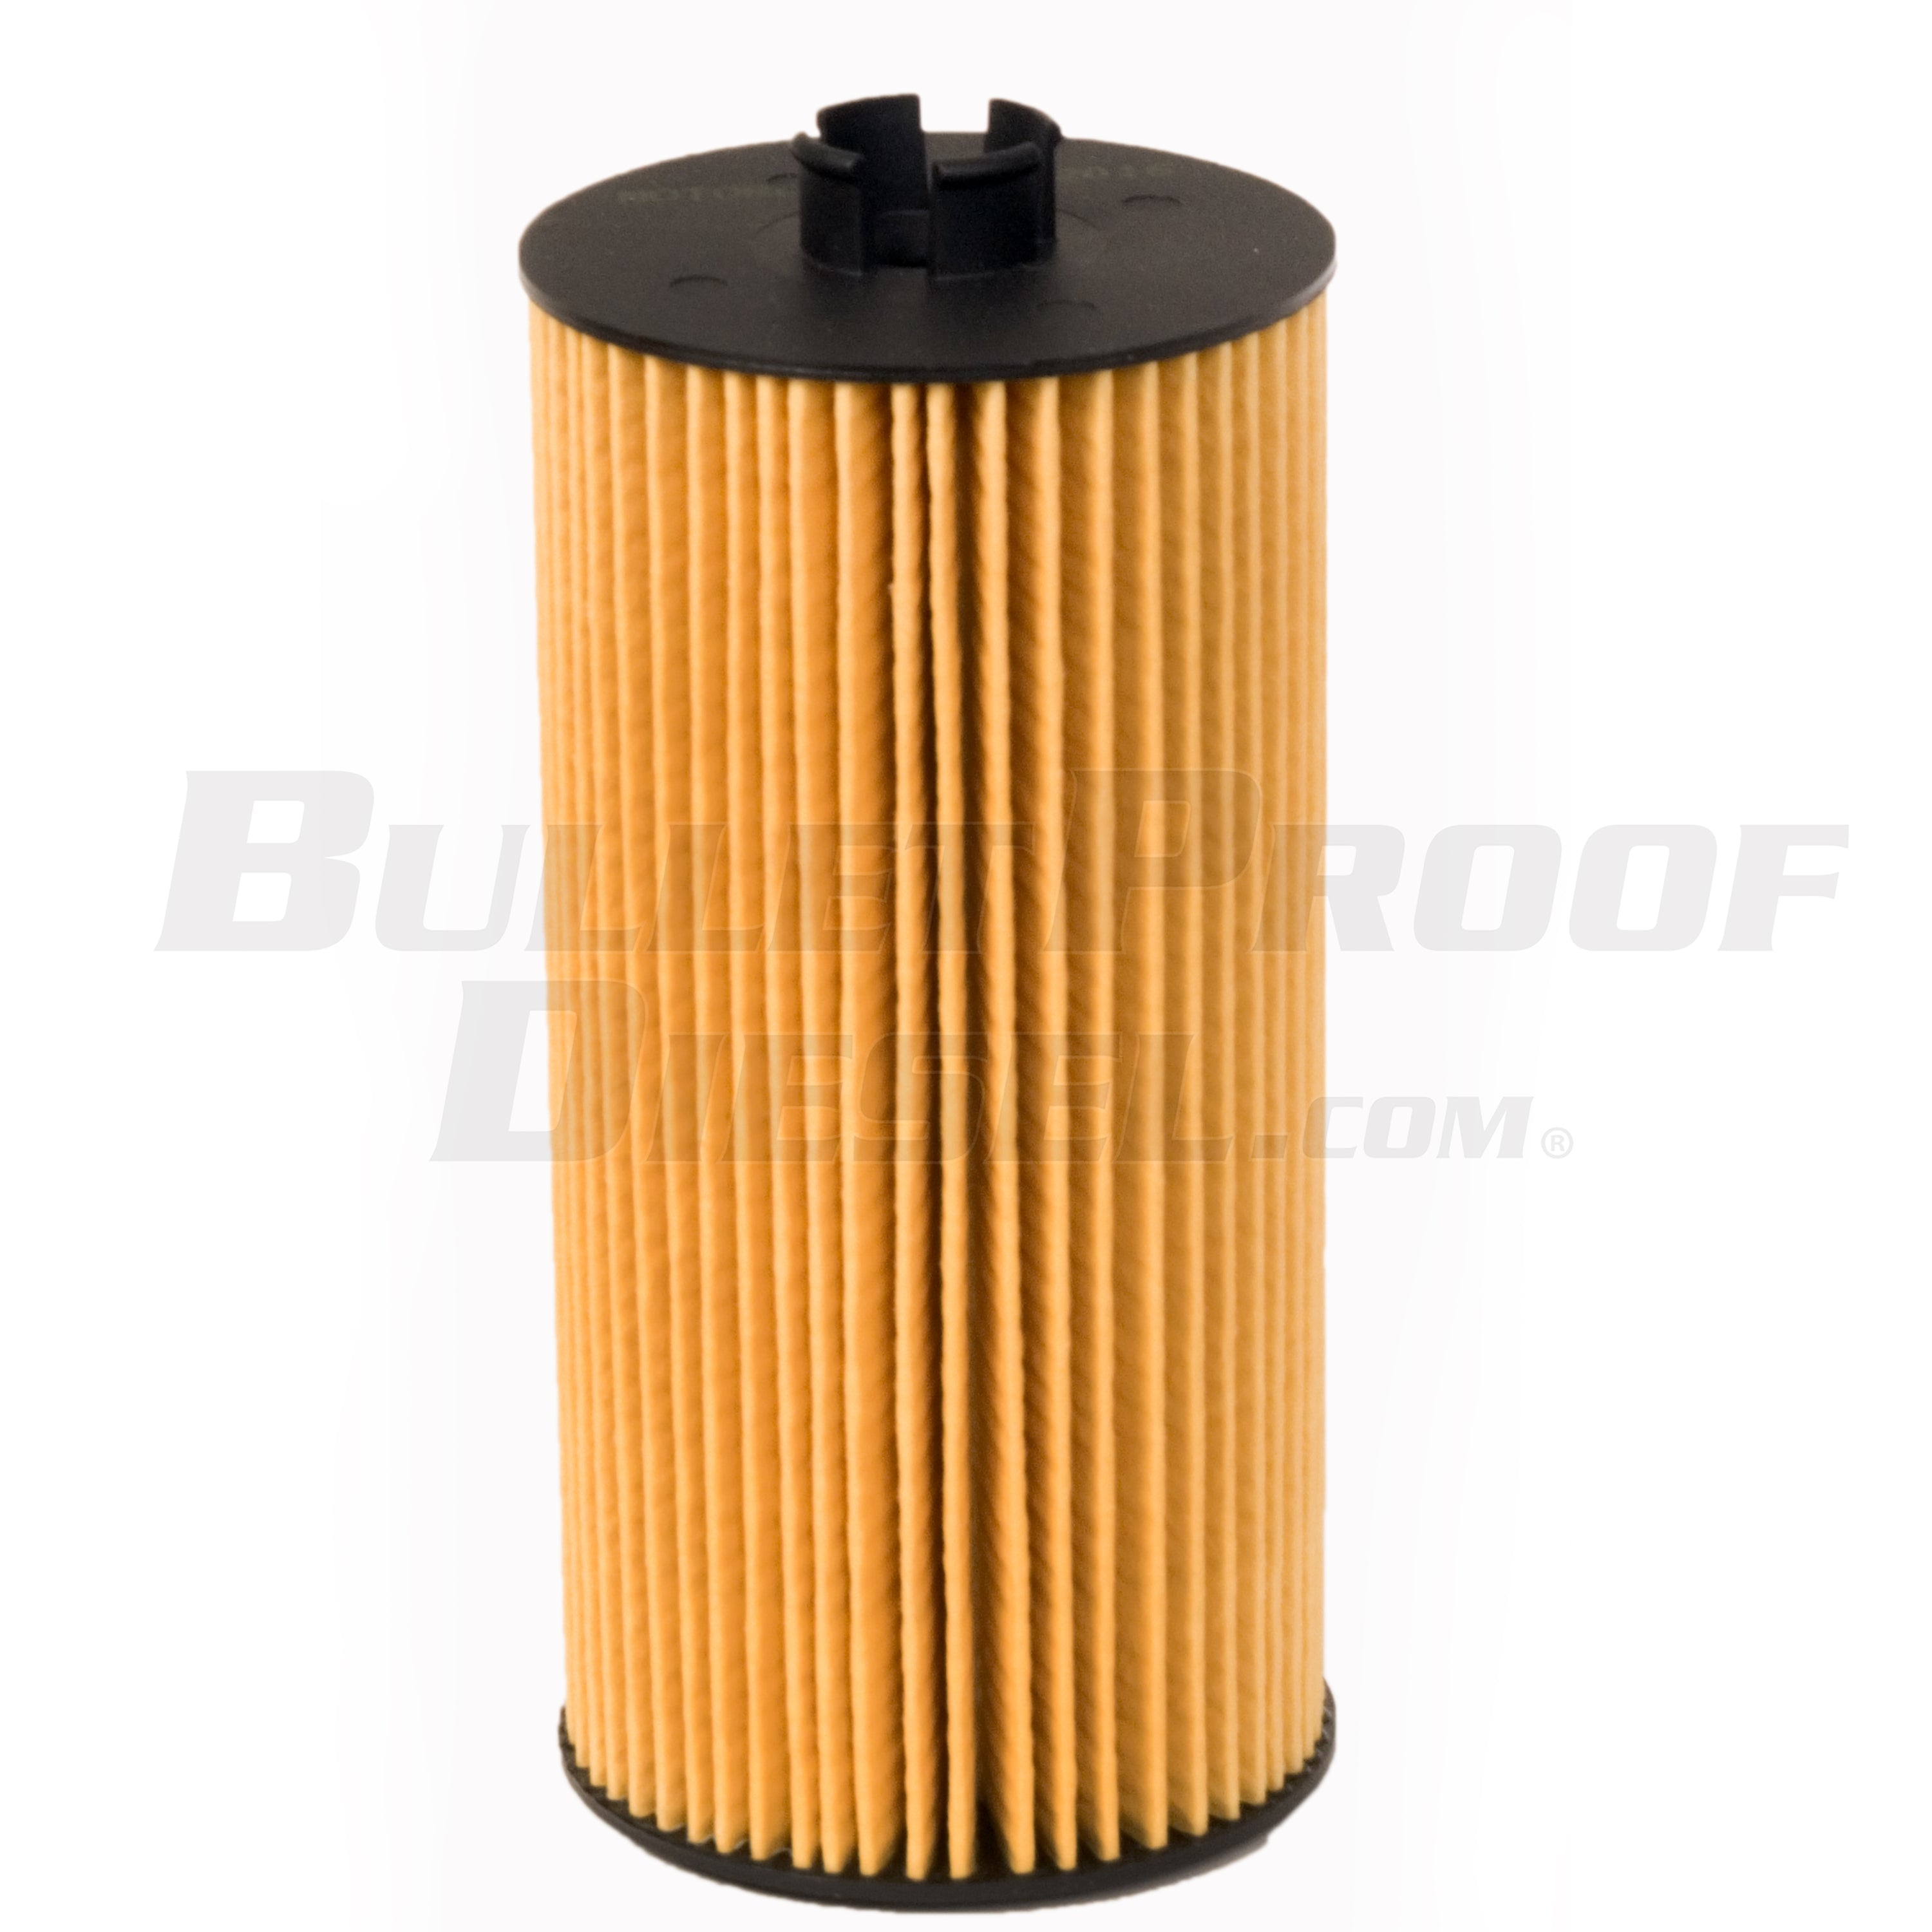 2005-2006 6.0L F-Series, Professional Package - OEM Oil Filter